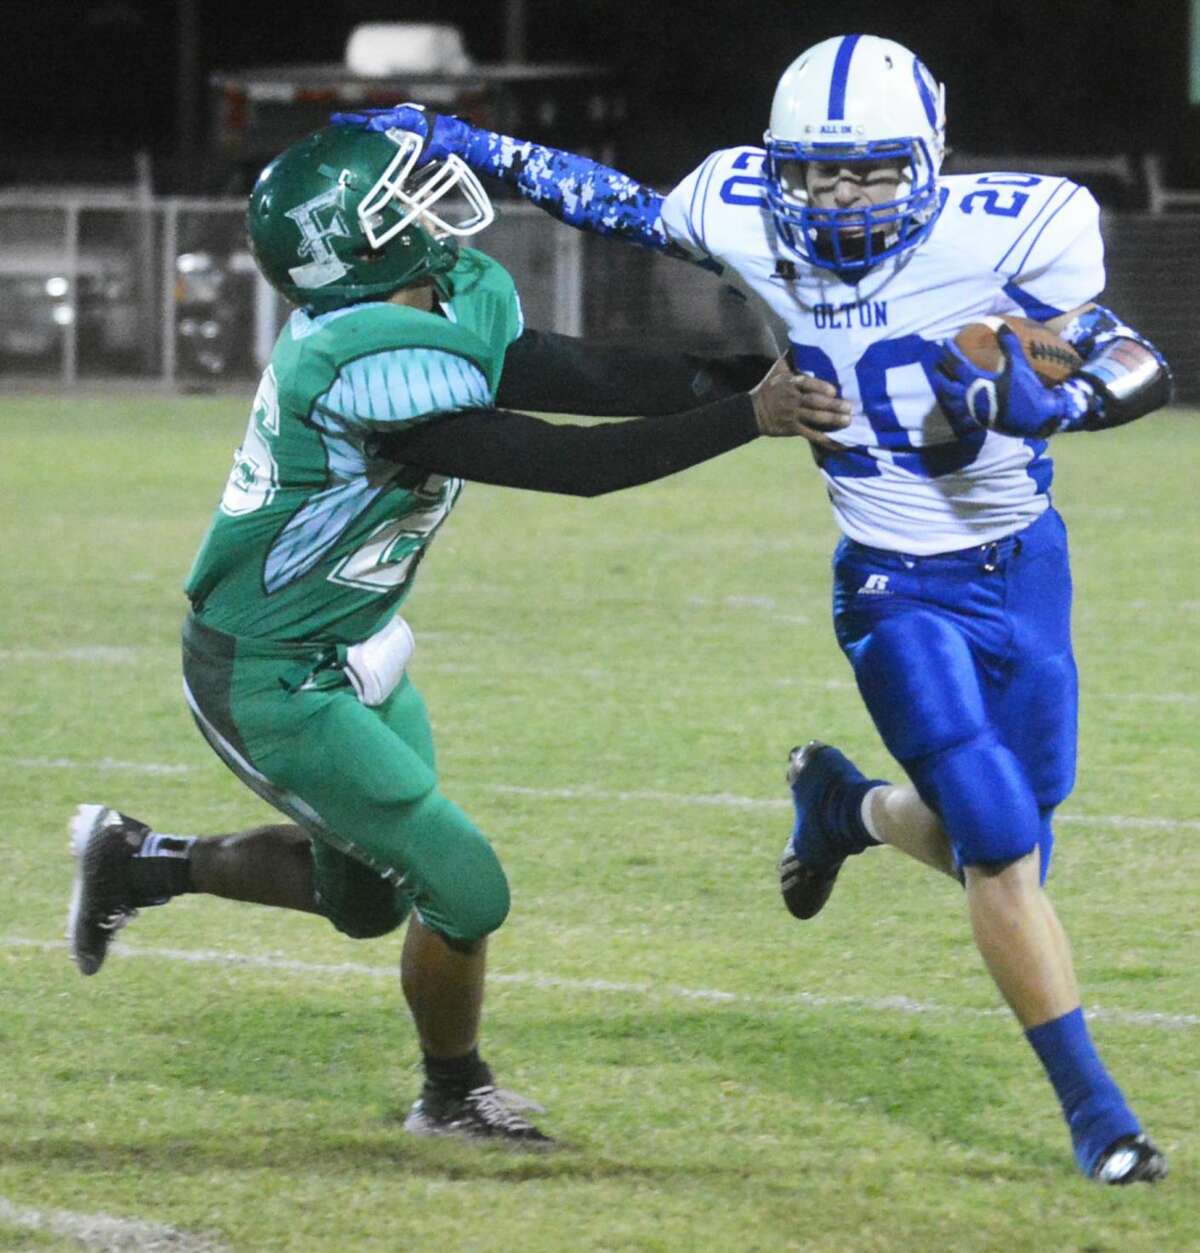 Olton receiver T.J. McCall (20) tries to break free from Floydada's Albert DeHoyas (26) during a district football game at Floydada Friday night. McCall caught three touchdown passes, but the Mustangs lost to the Whirlwinds, 24-19.